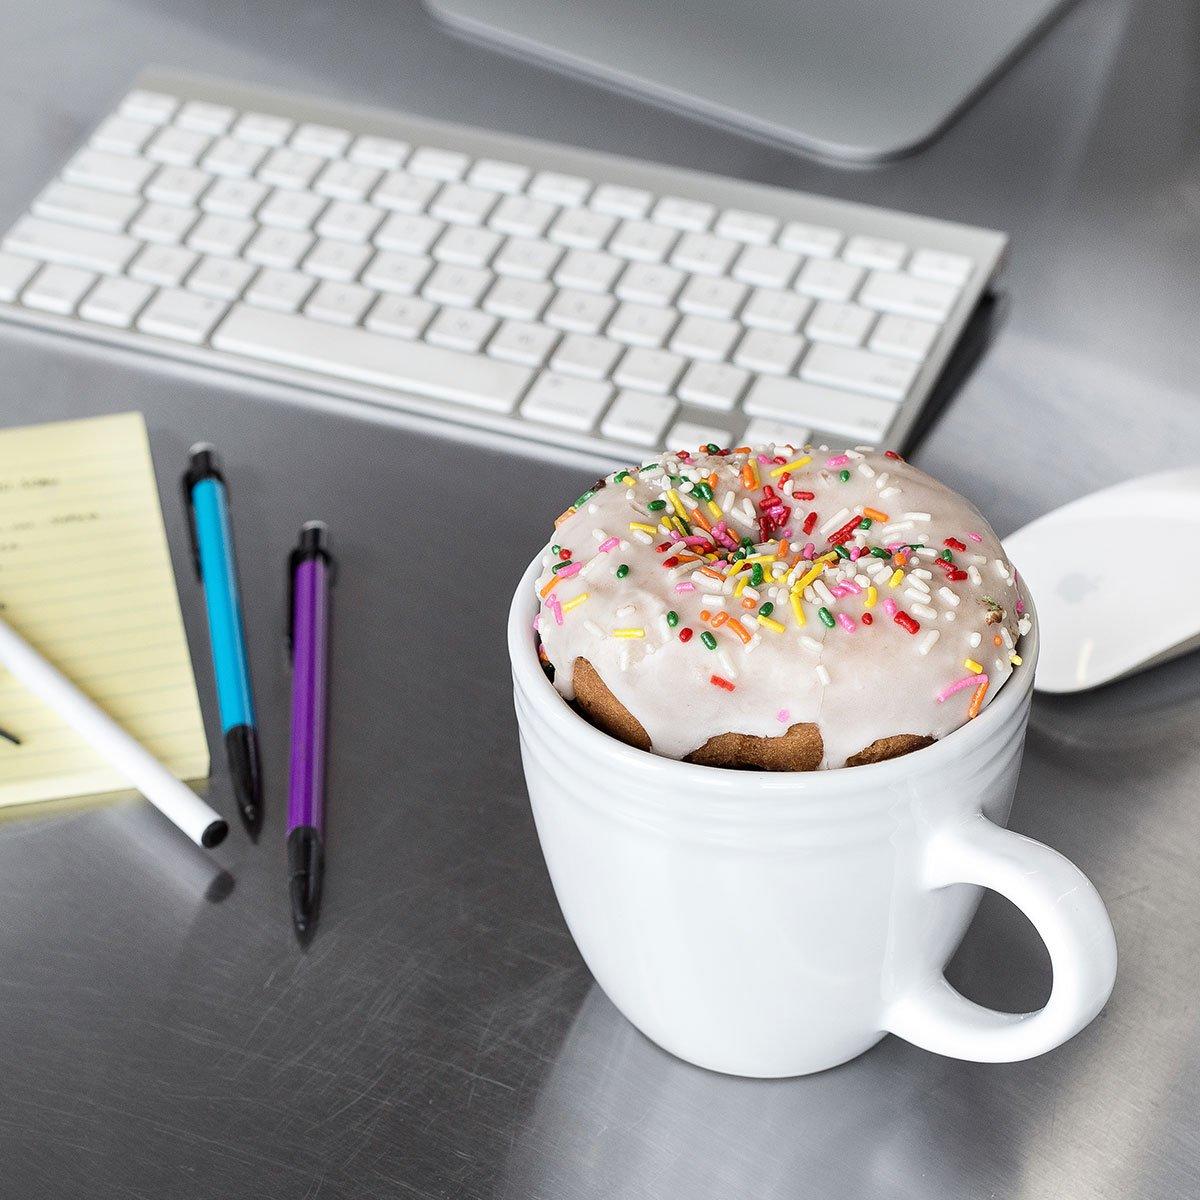 Best Morning Ever Mug - Holds Cookies, Doughnuts, Muffins, Biscuits | Uberstar.com